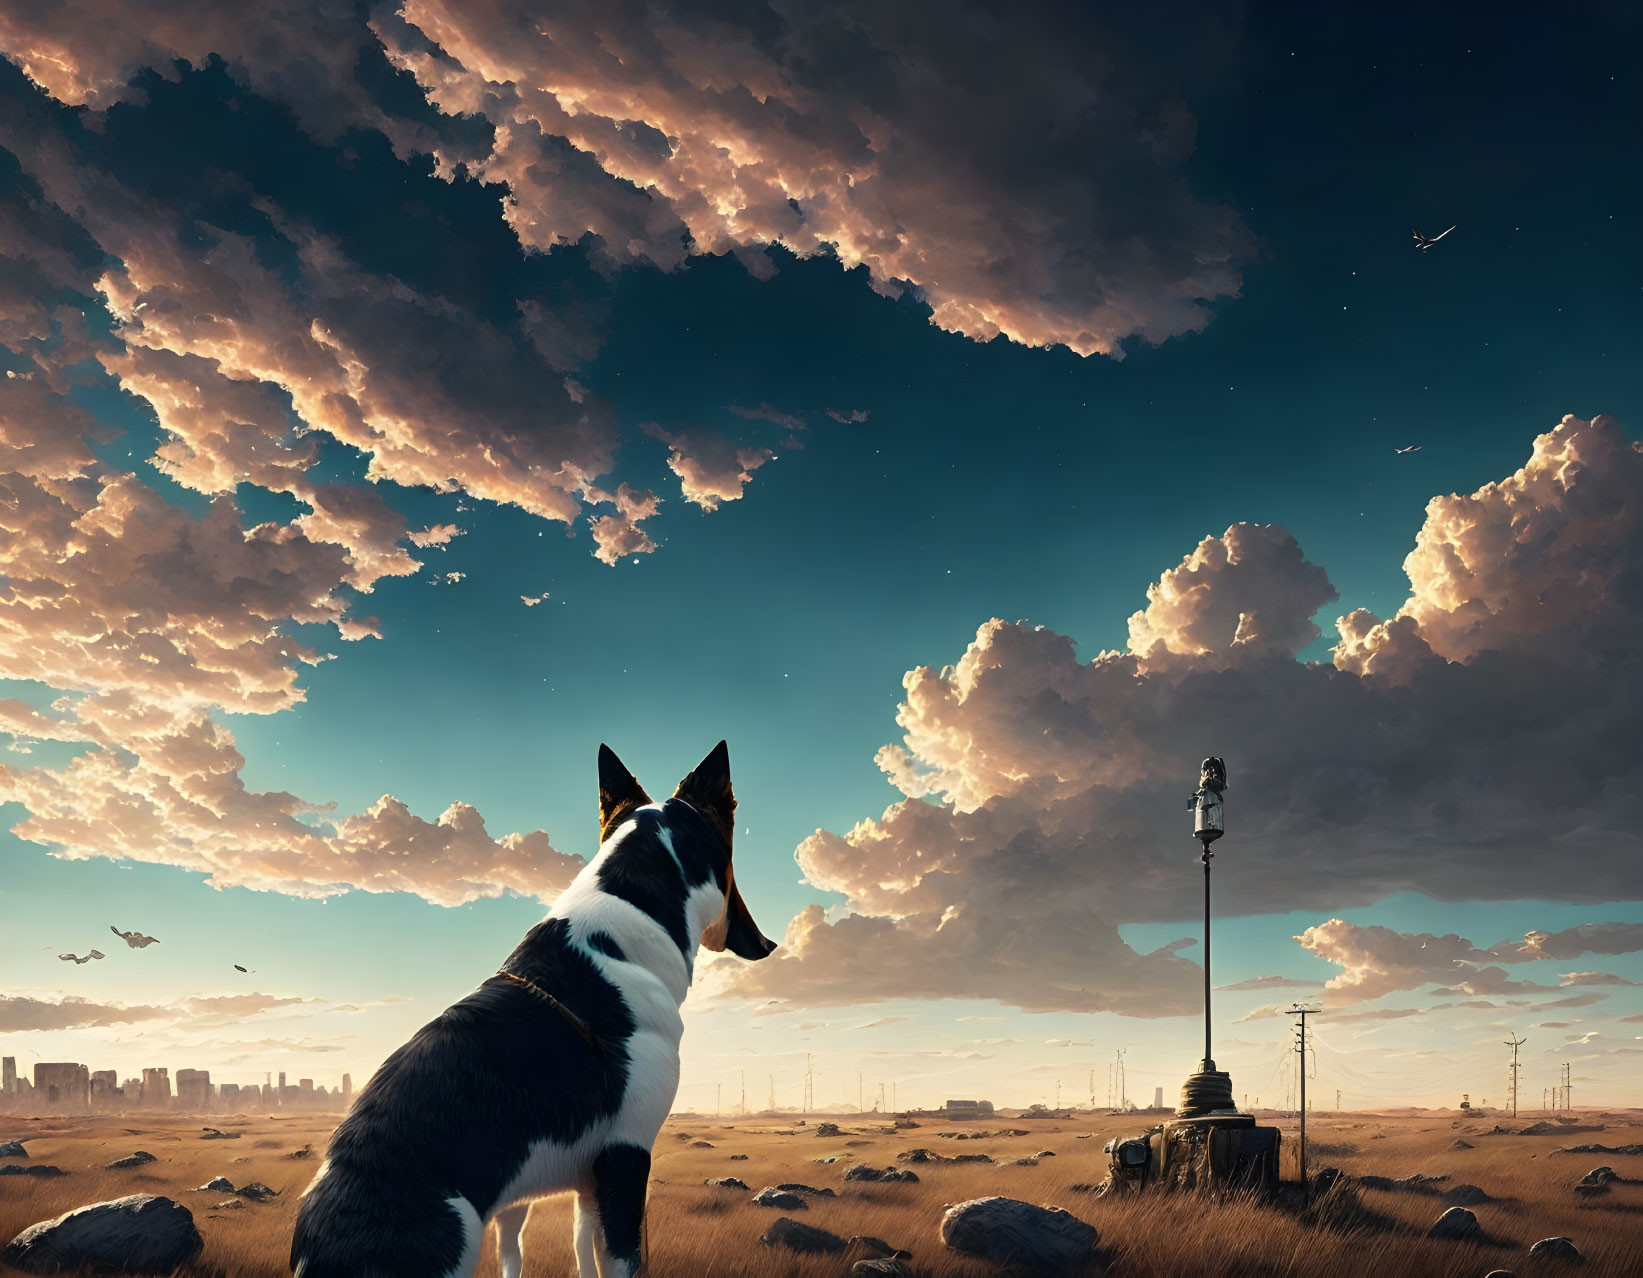 Dog looking at city skyline under dramatic sky with fluffy clouds and lamp post.